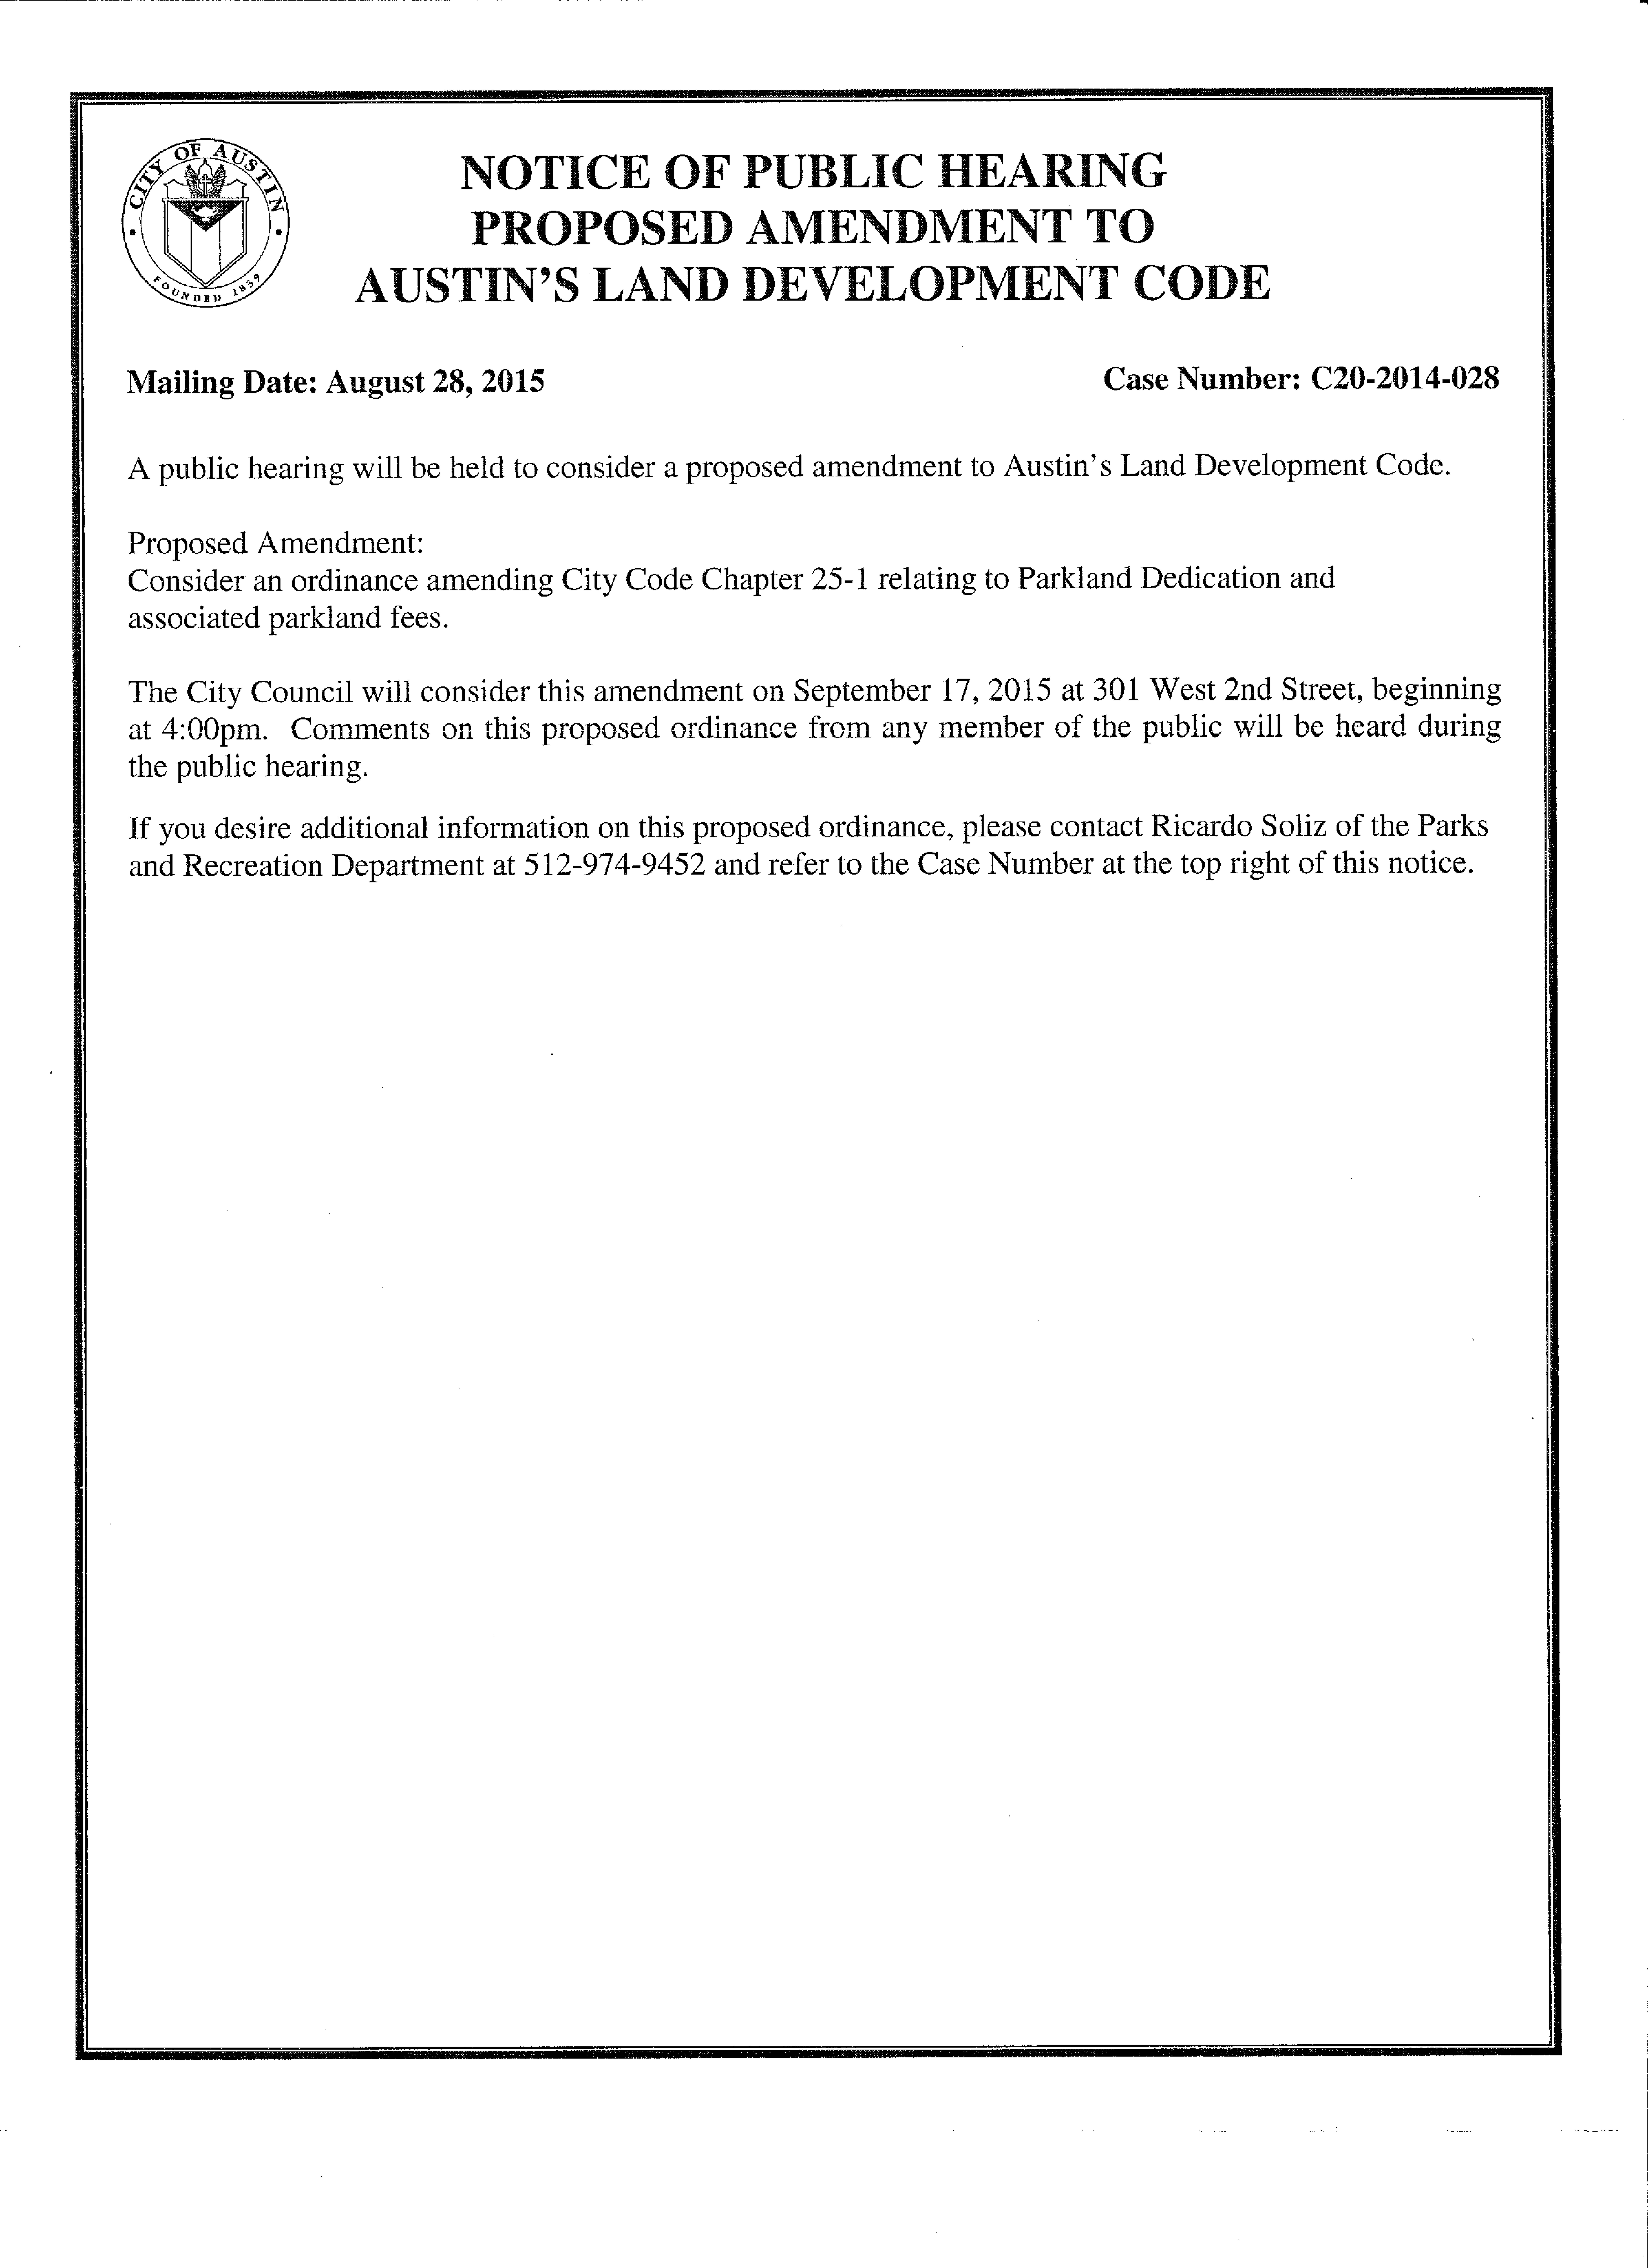 [C20-2014-028] Public Hearing August 28, 2015 to Consider Parkland Dedication and Associated Parkland Fees